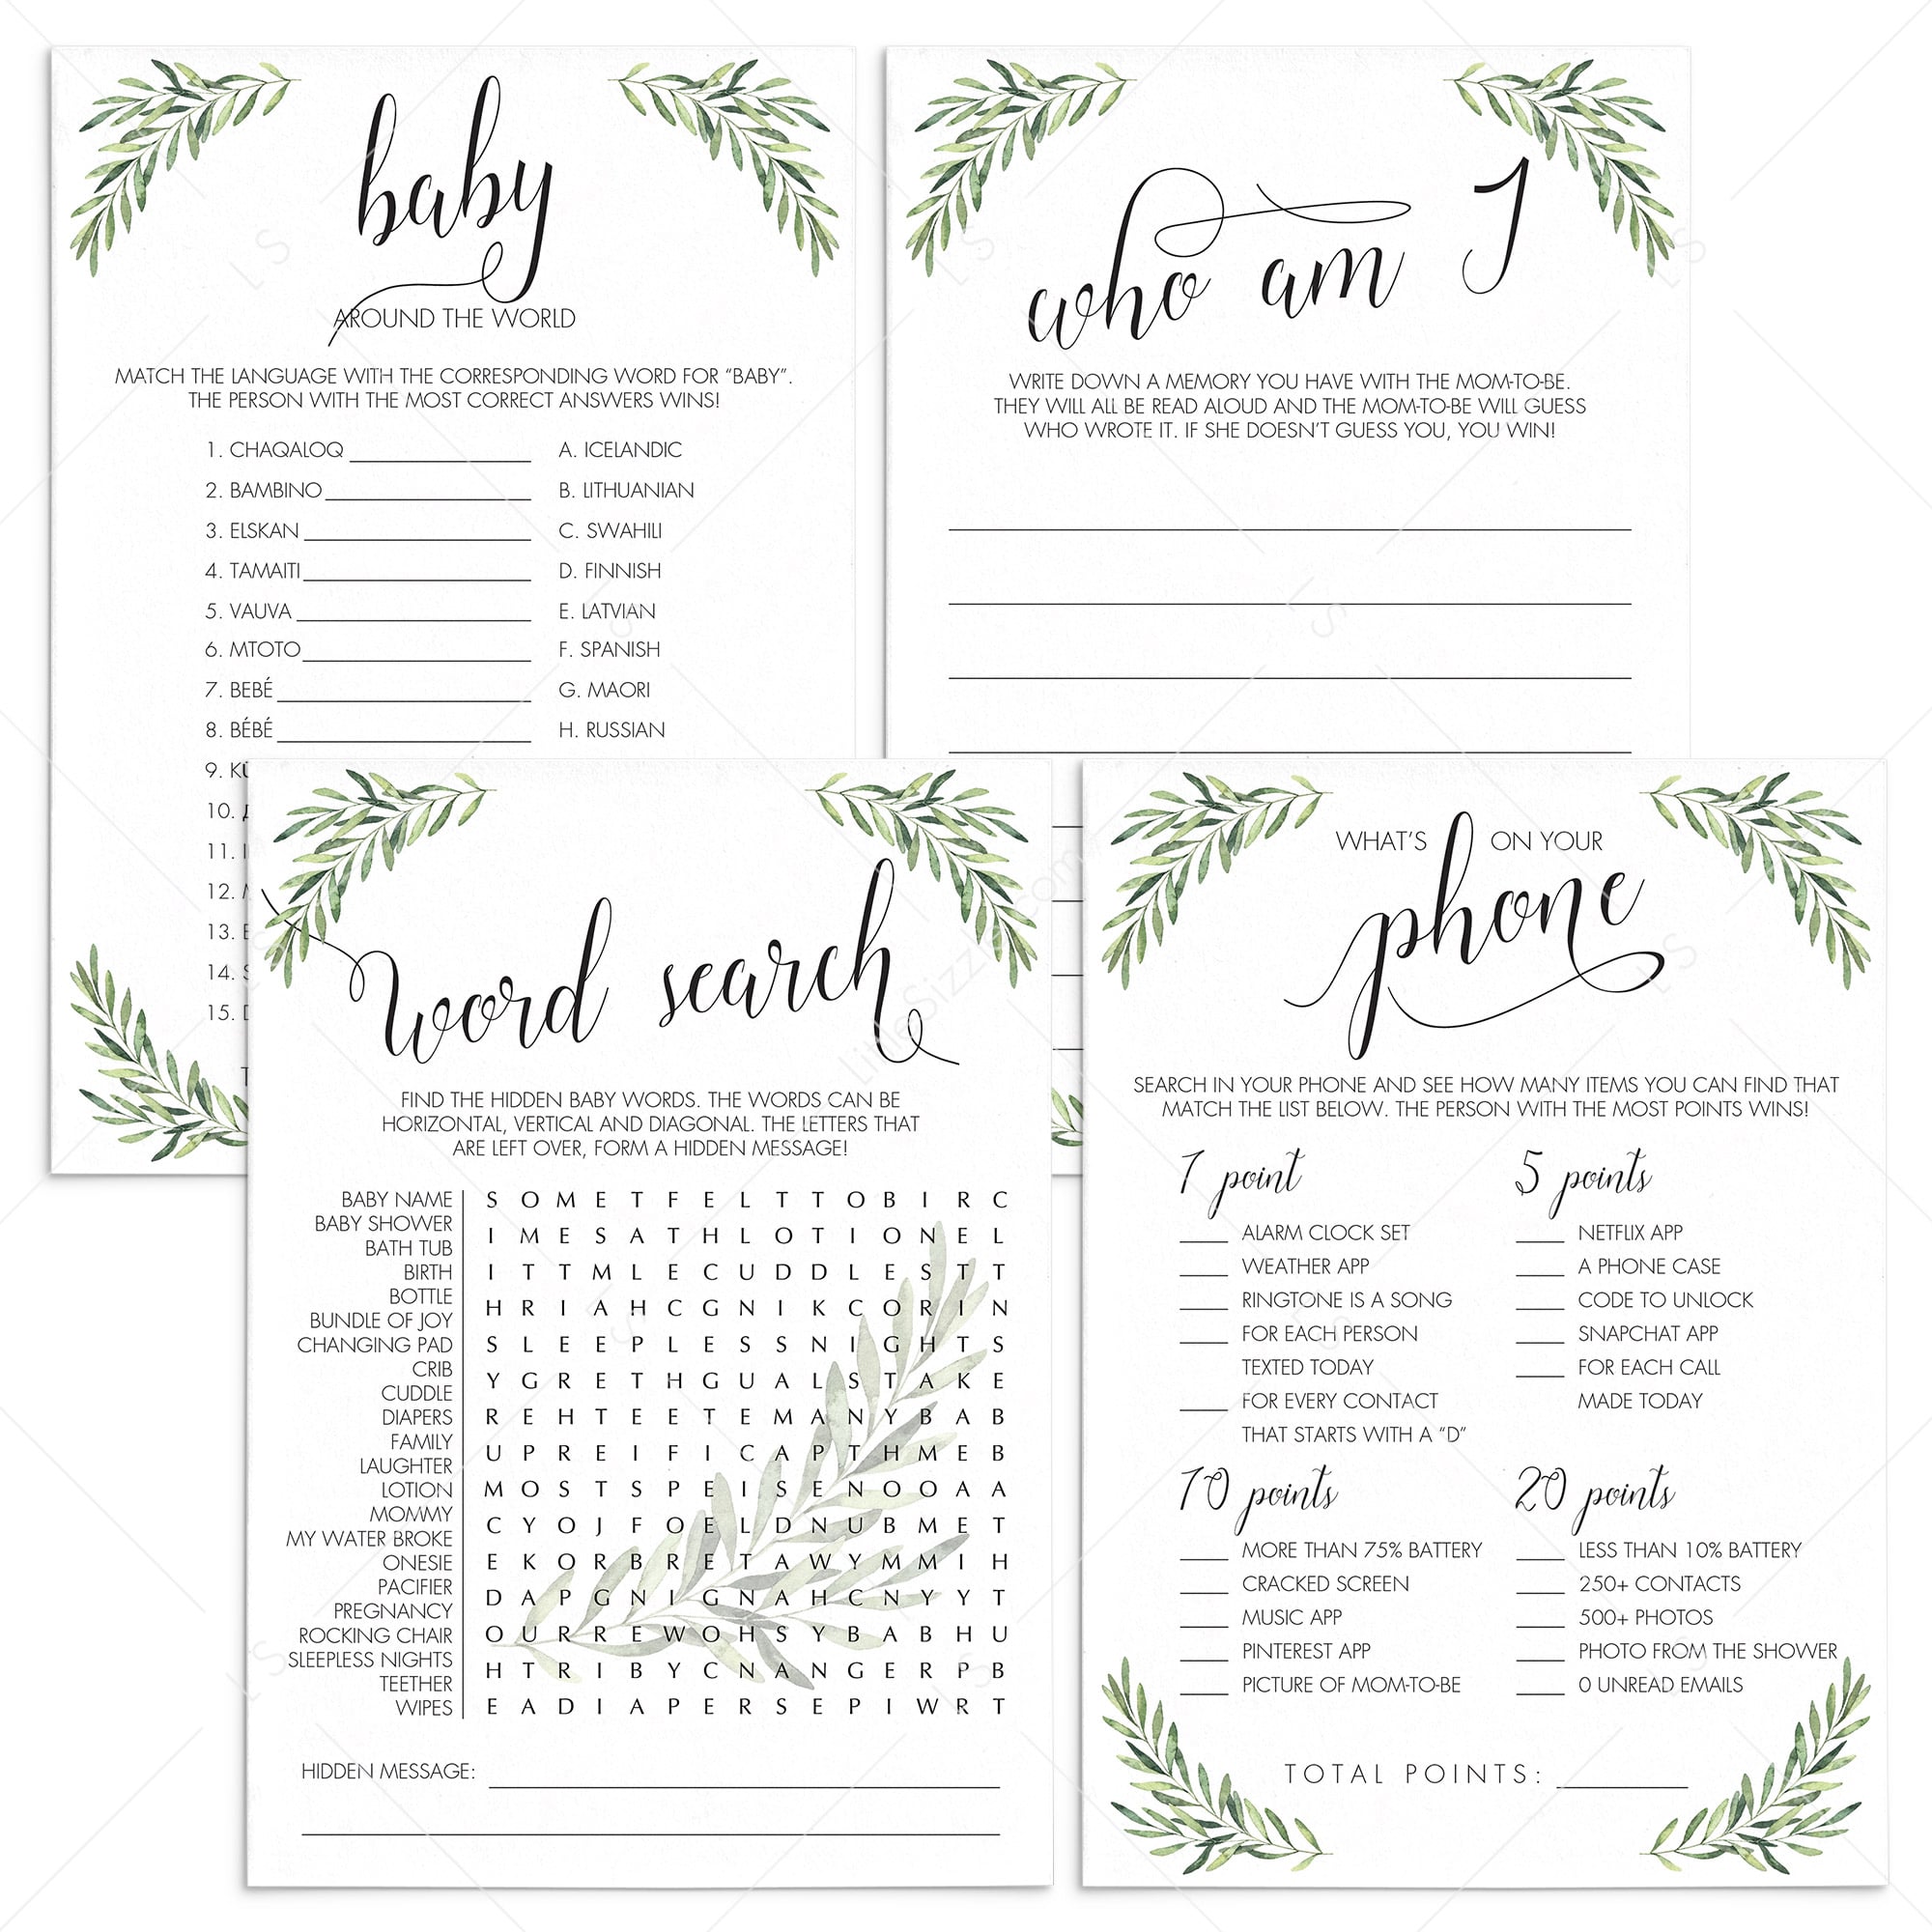 Leaf Baby Shower Games Package Instant Downloadable PDF by LittleSizzle